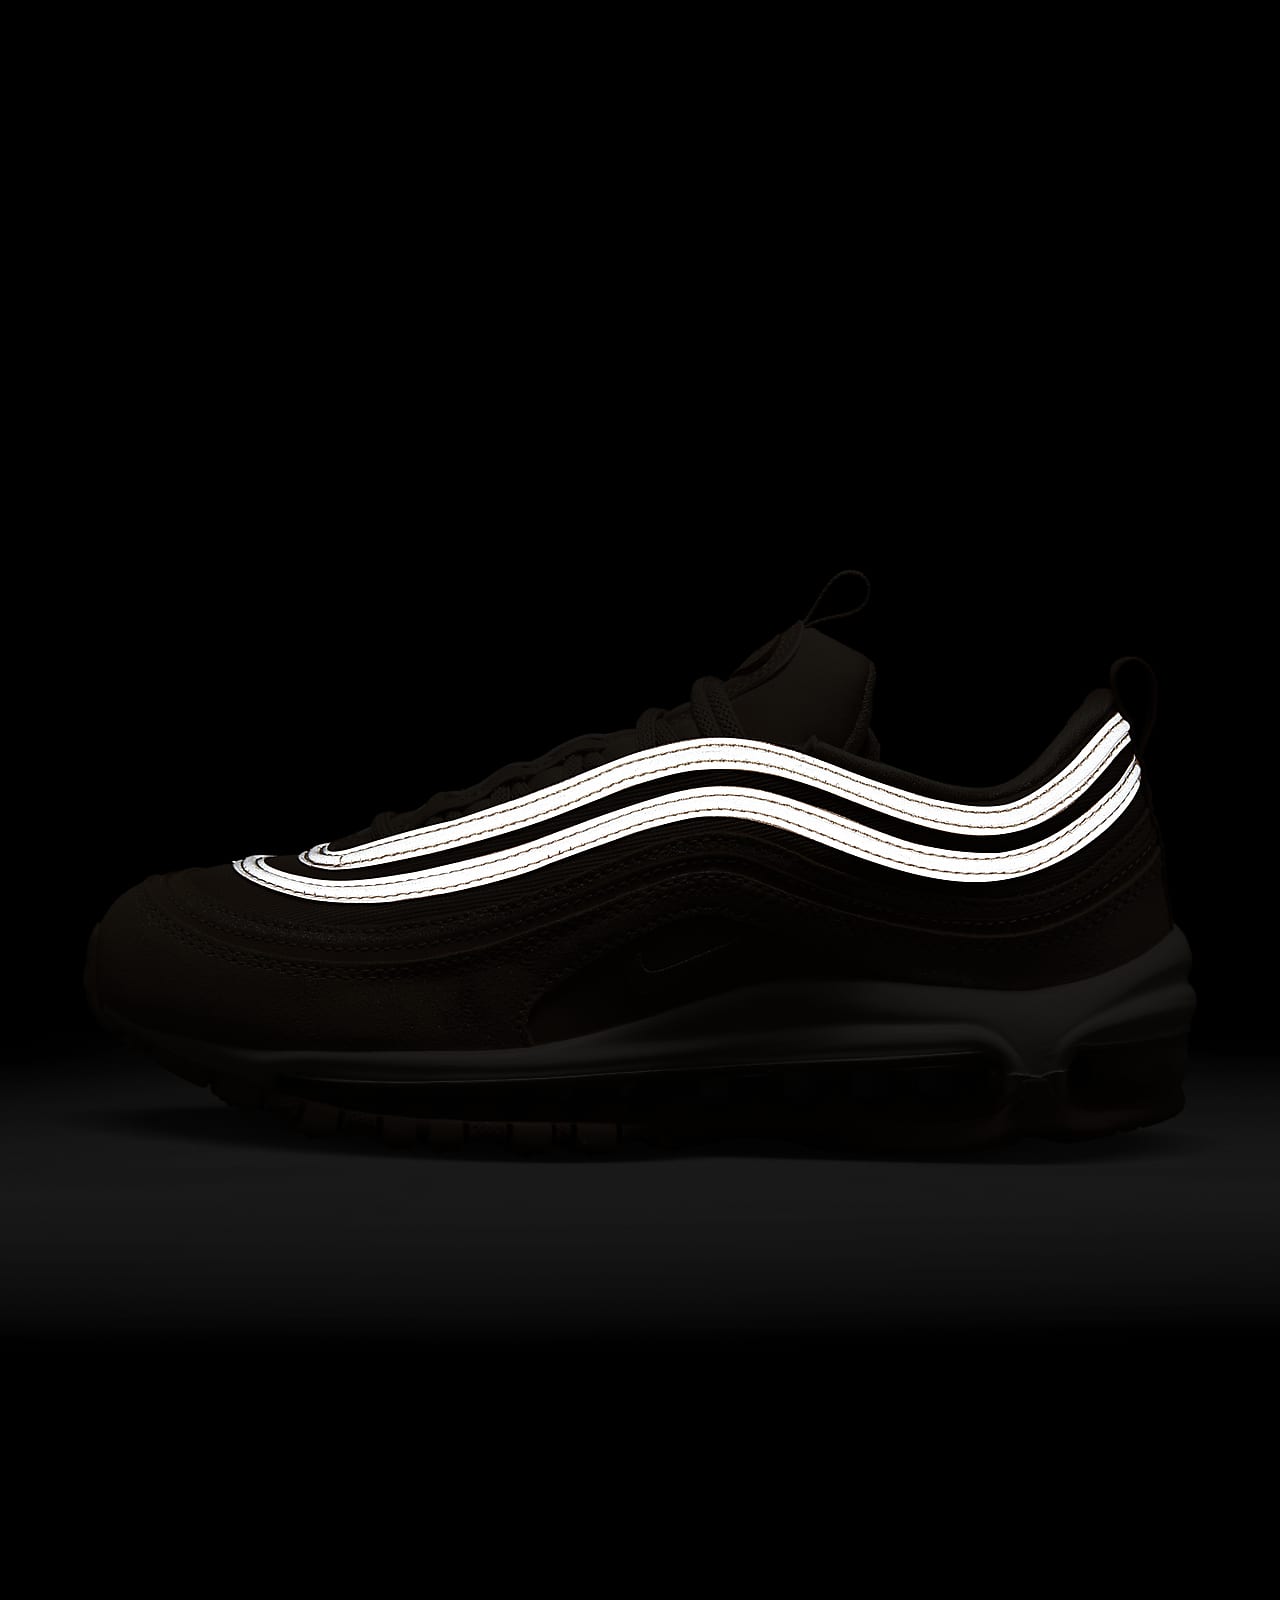 Nike Air Max 97 Shoes in Black/Anthracite/White